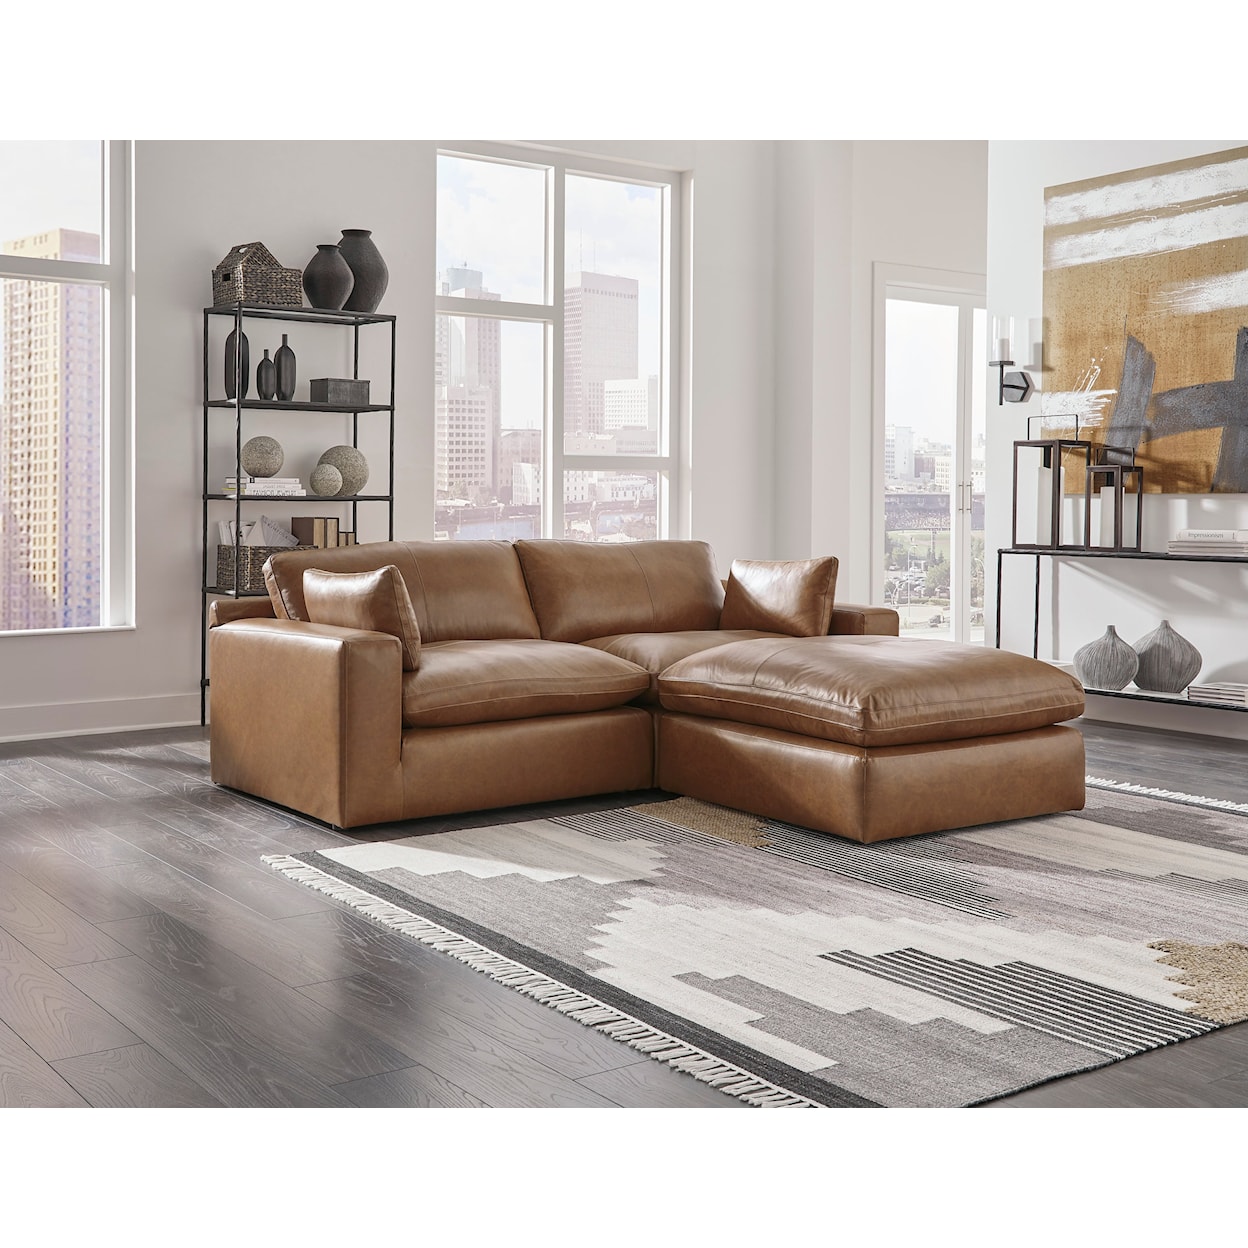 StyleLine Emilia Leather Match Modular Sectional with Ottoman